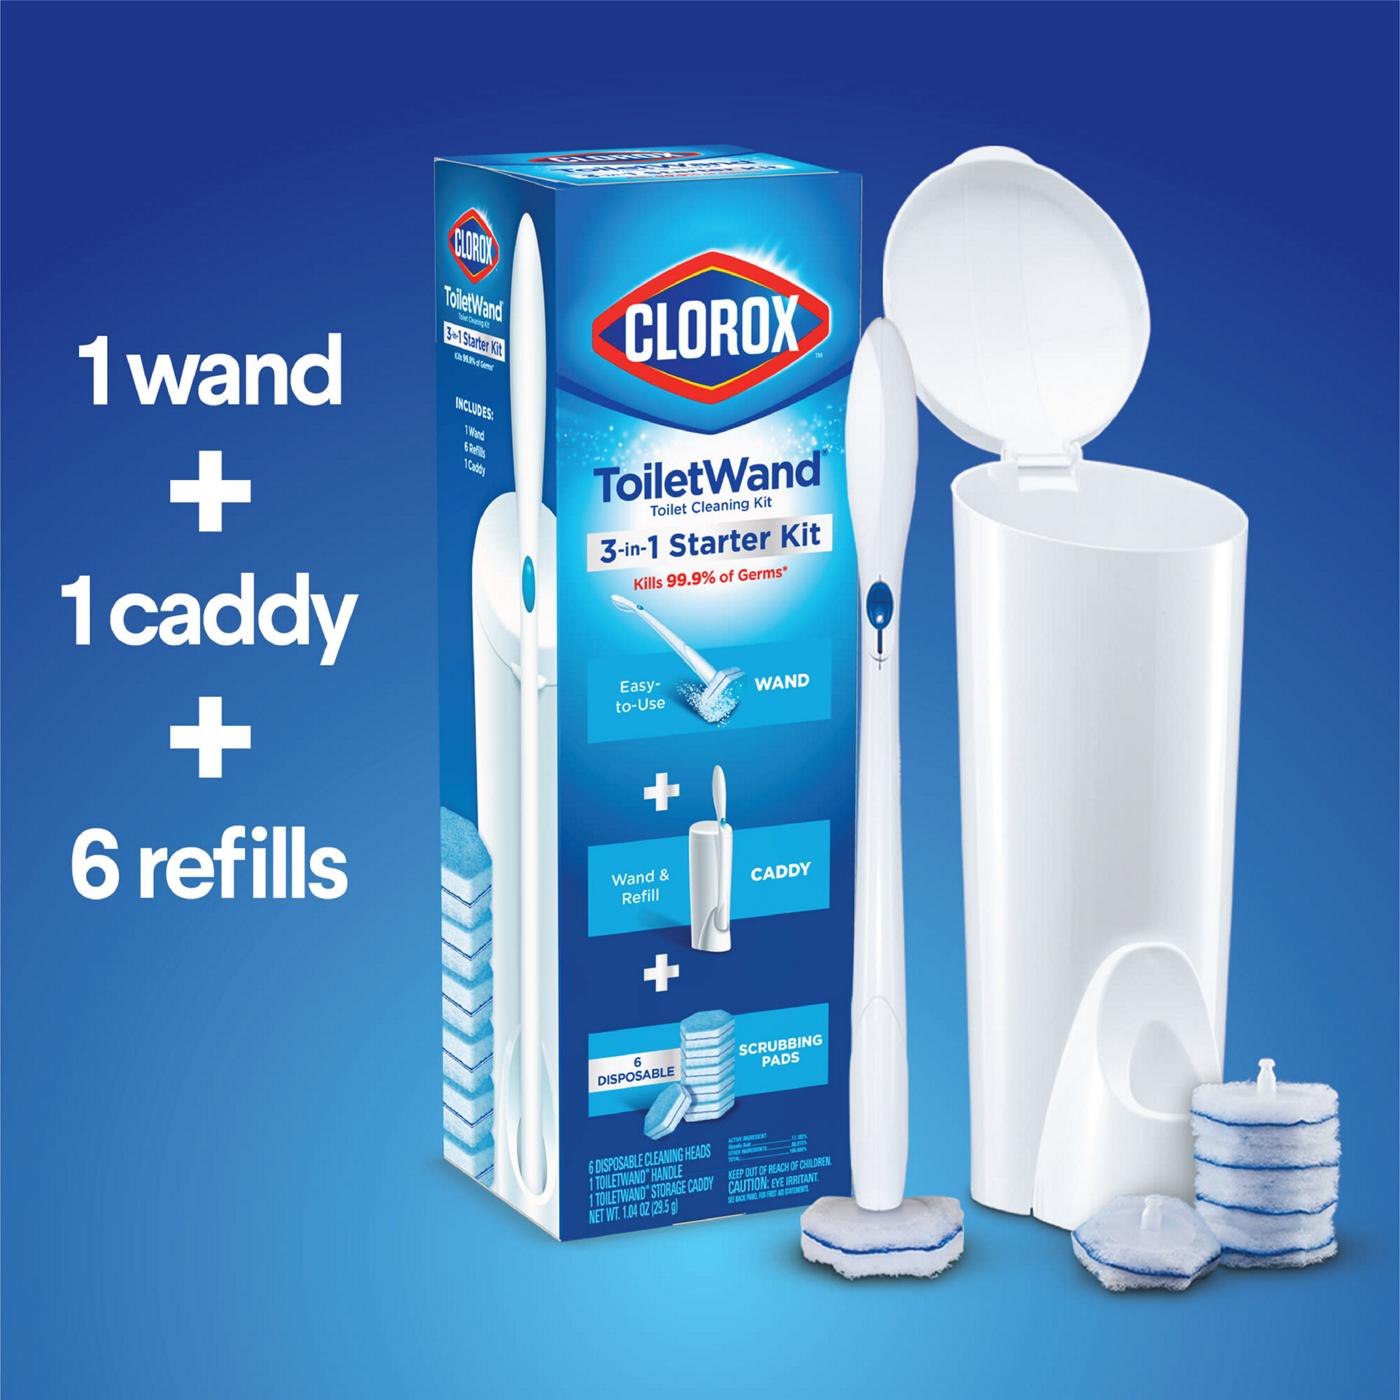 Clorox Toilet Wand 3-in-1 Starter Kit; image 2 of 9